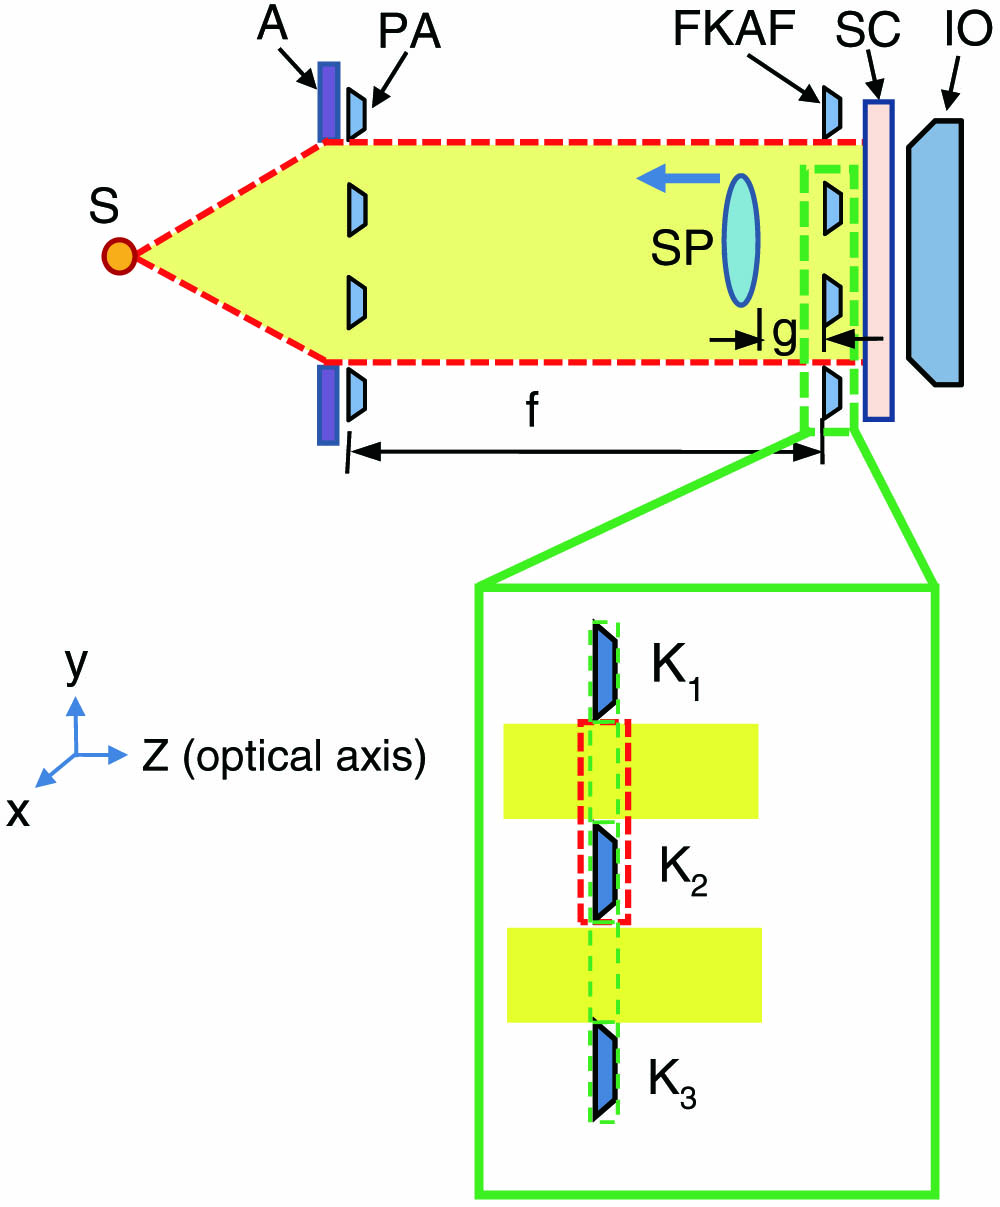 (Color online) Schematic diagram of the FDF method. S, X-ray tube source; A, lead aperture; SC, scintillation crystal; IO, visible light imaging optics; SP, specimen; f, focal length of PA; g, distance between the end of the specimen surface and the FKAF; blue arrow, translation direction of SP. k1, k2, k3, knife edges; z axis, optical axis.